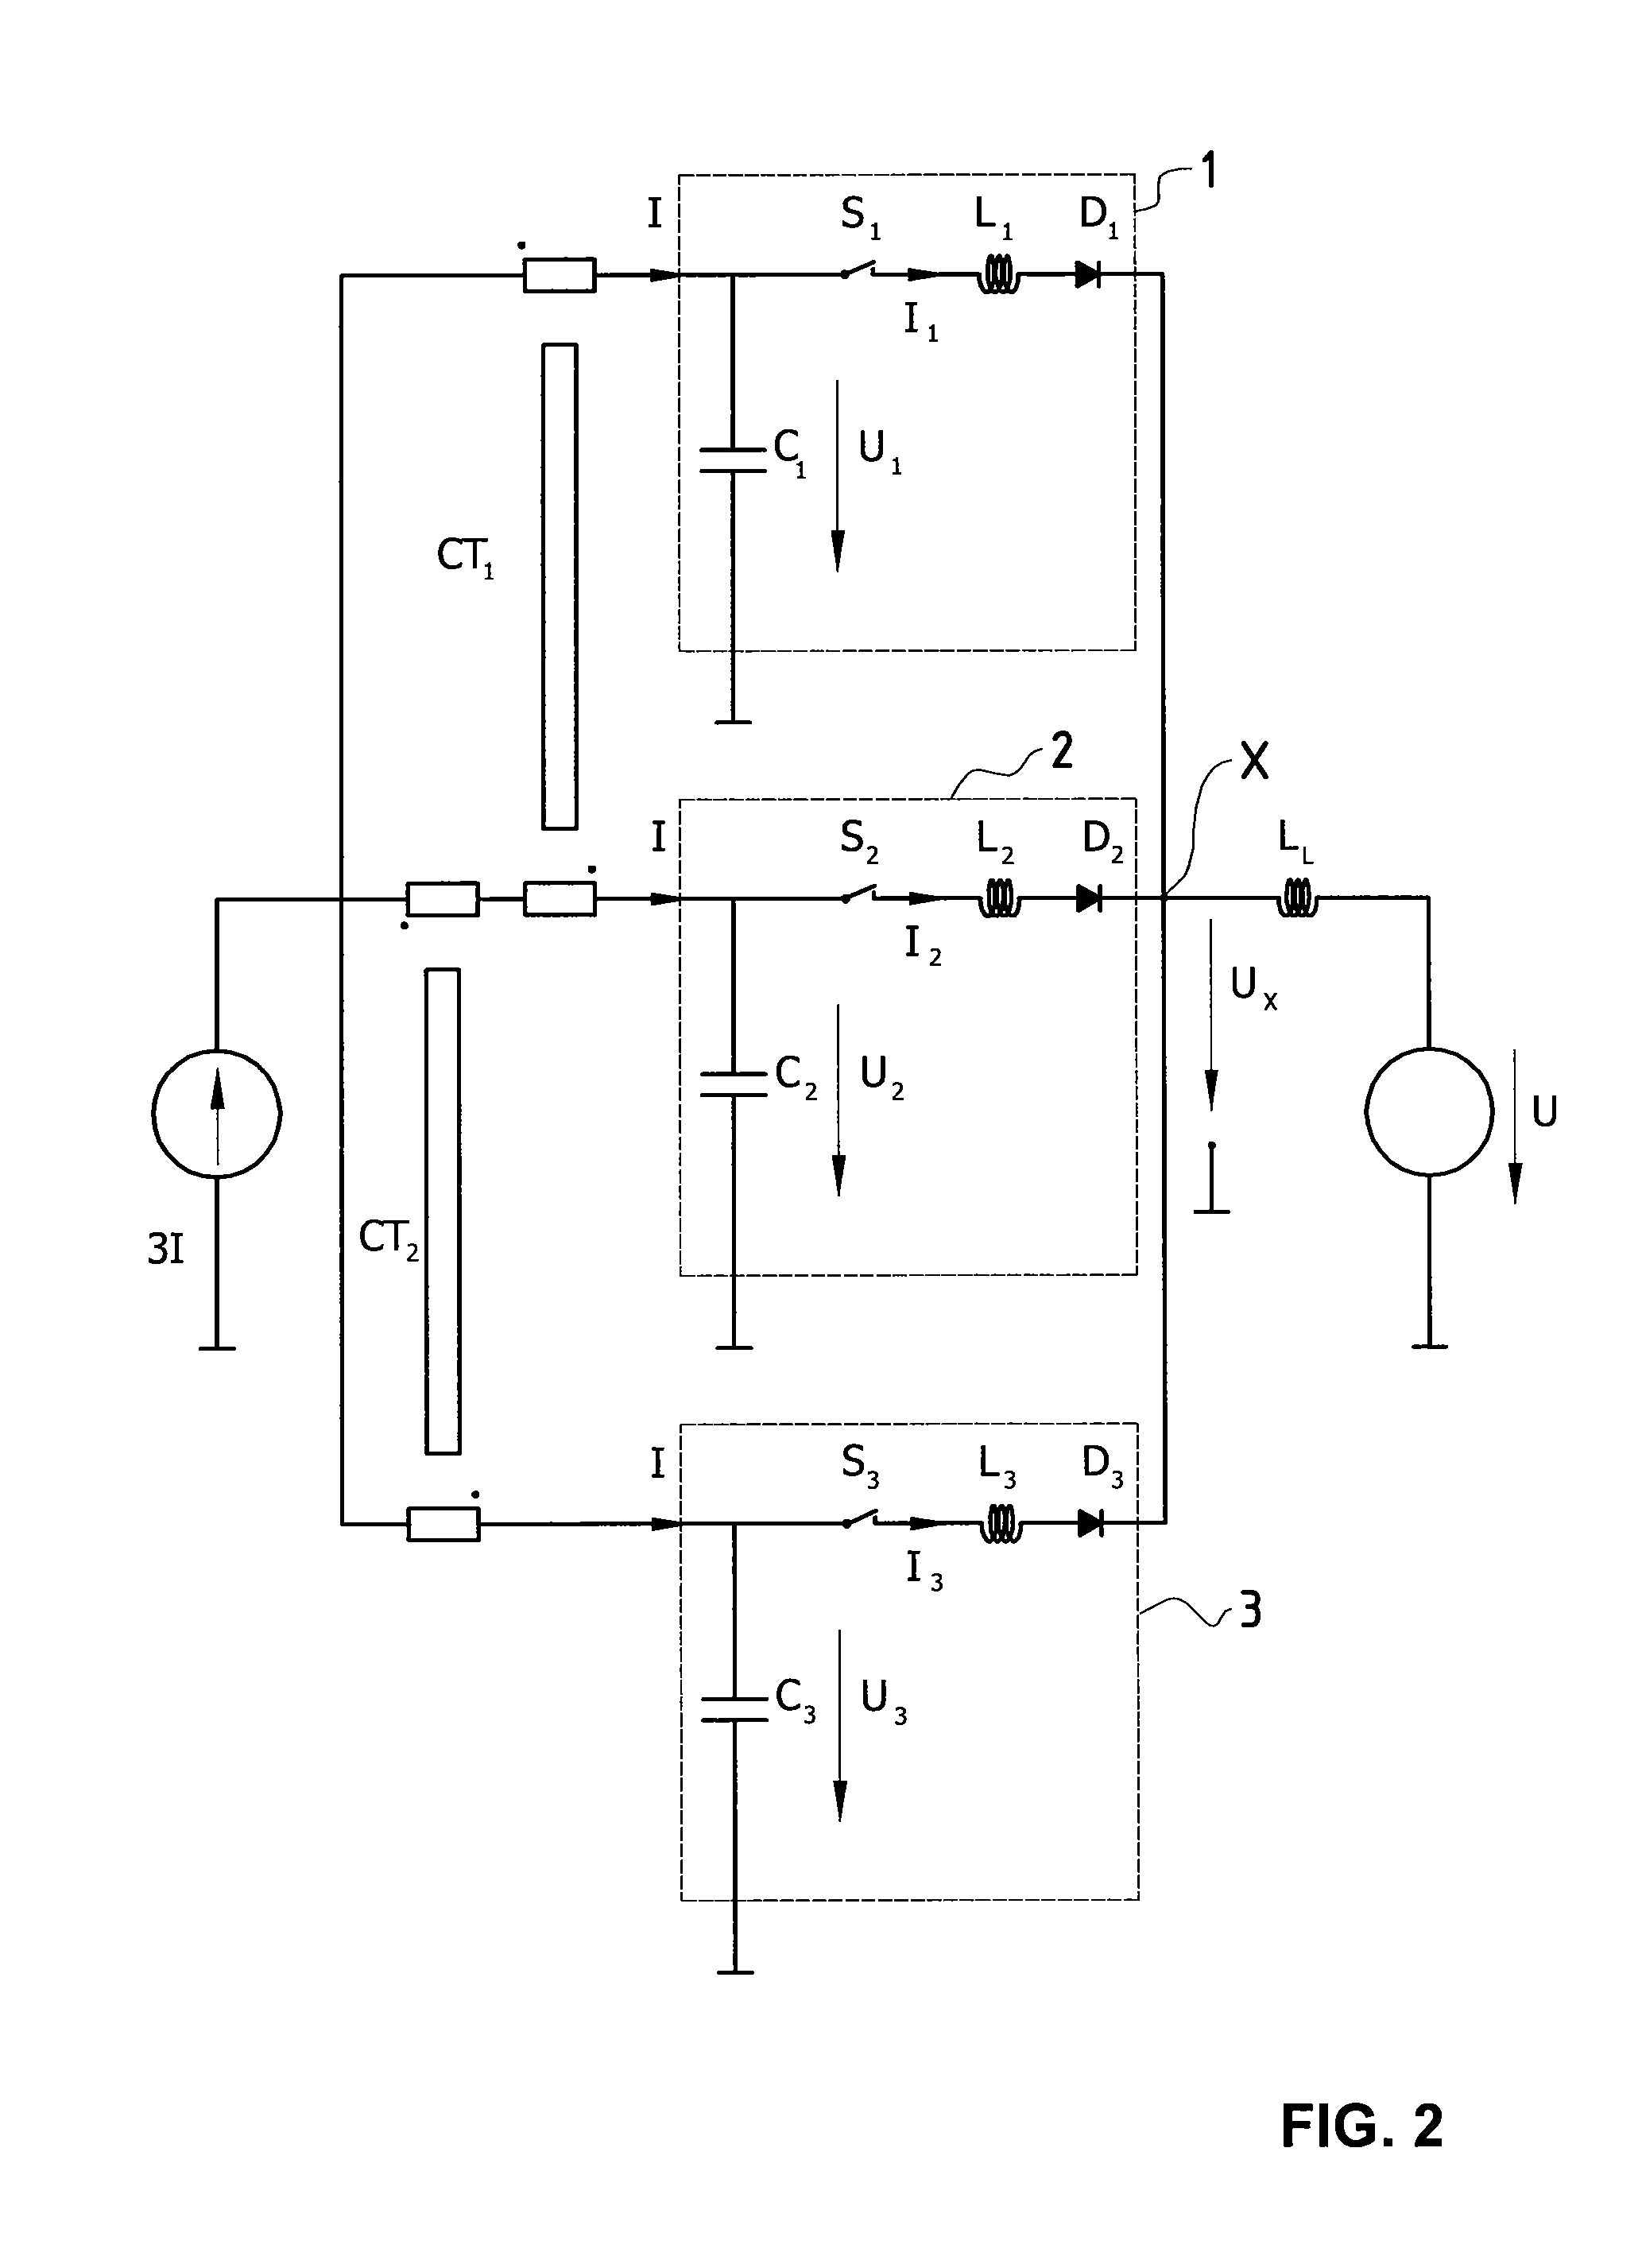 Multiphase soft-switched DC-DC converter